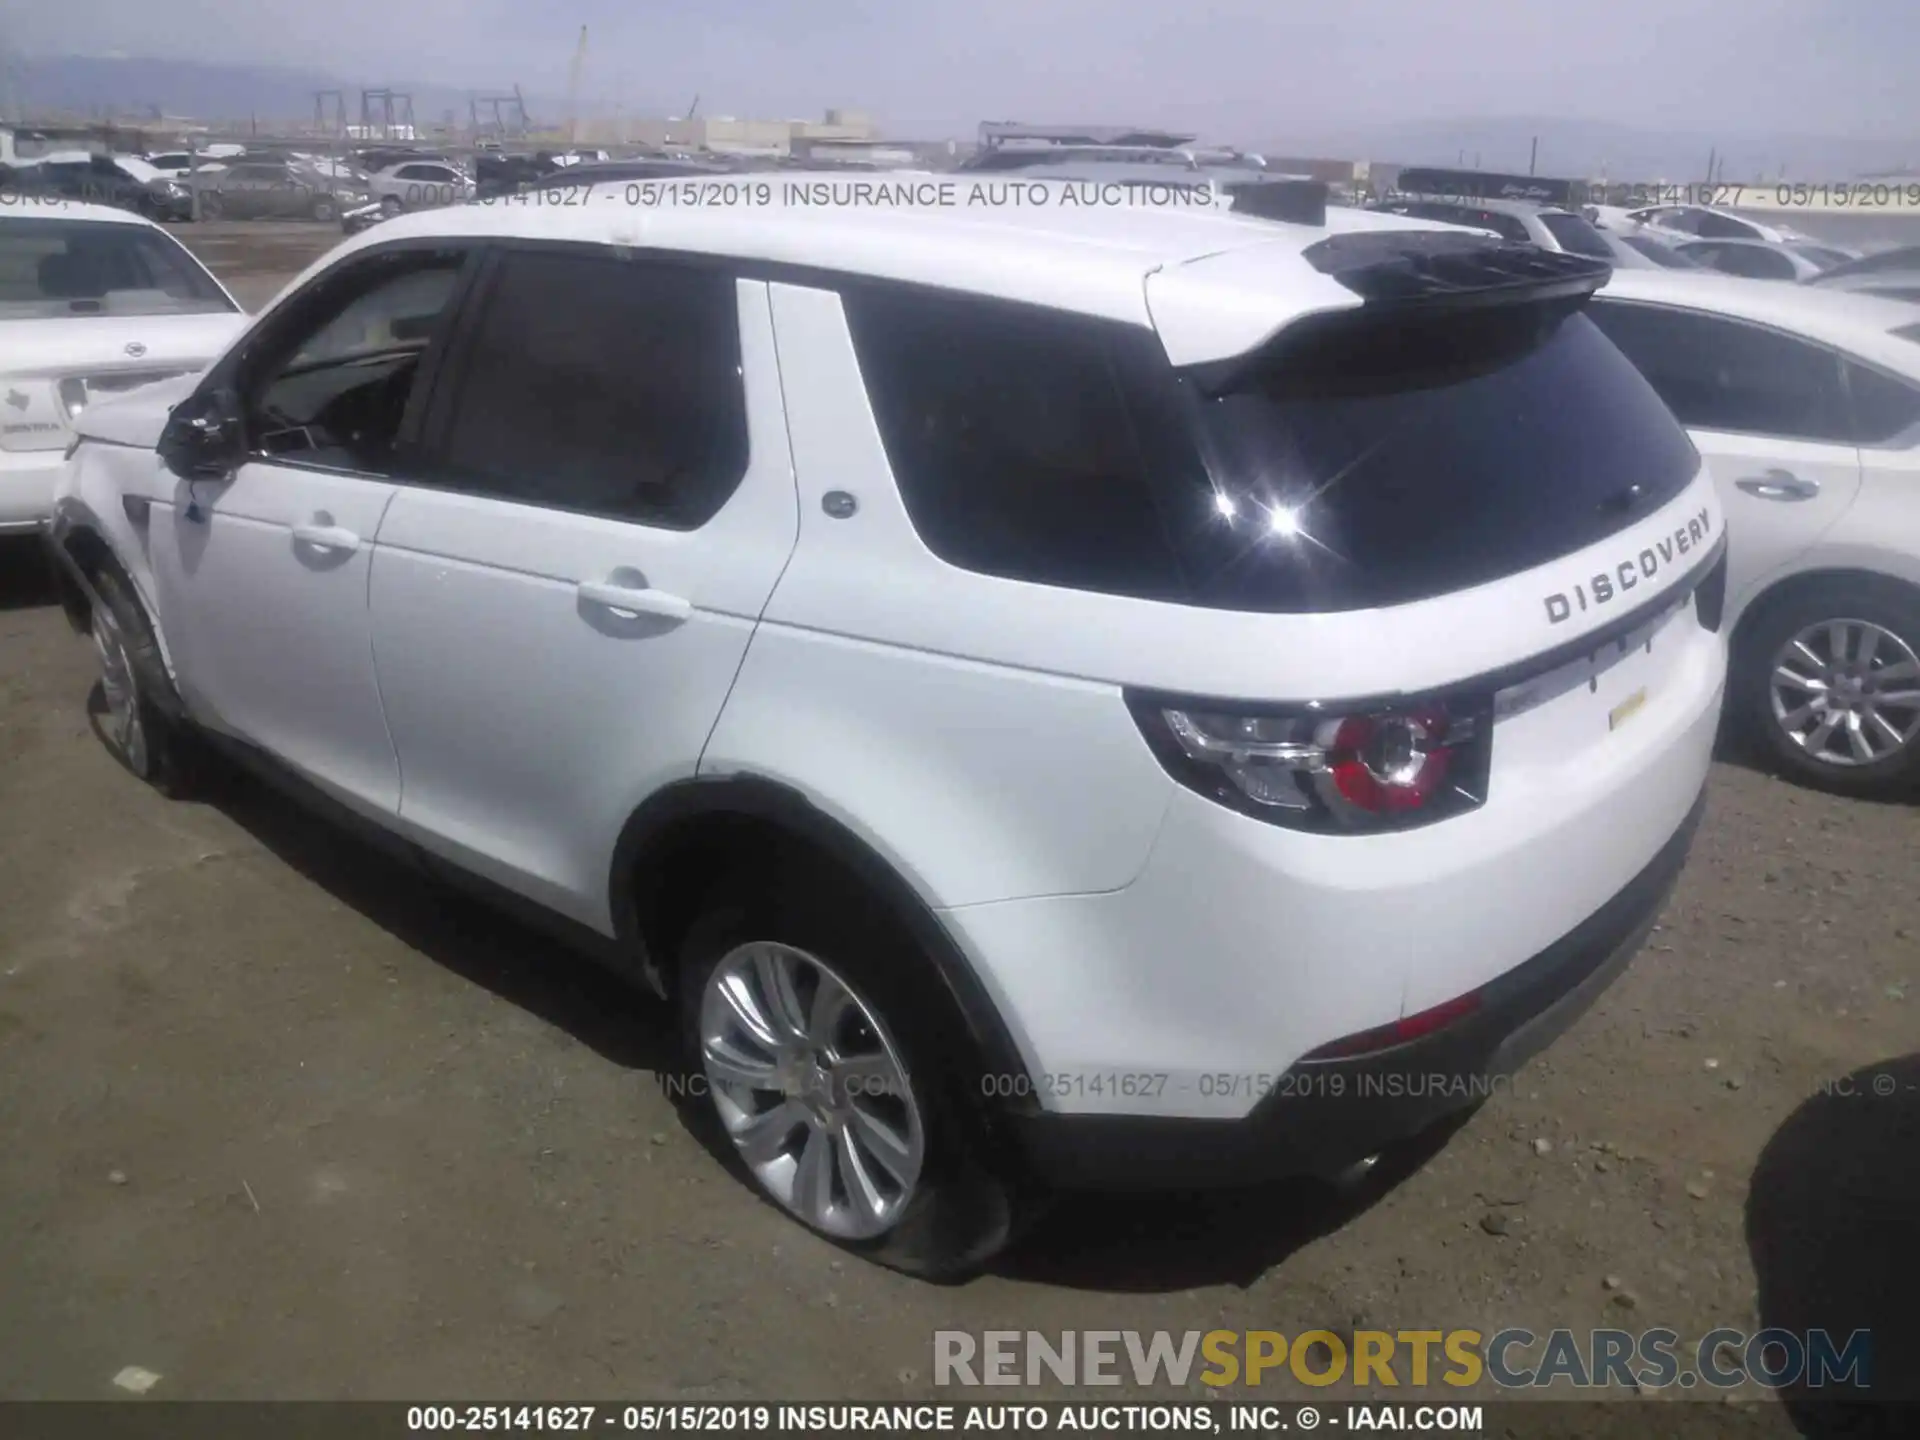 3 Photograph of a damaged car SALCP2FXXKH799937 LAND ROVER DISCOVERY SPORT 2019